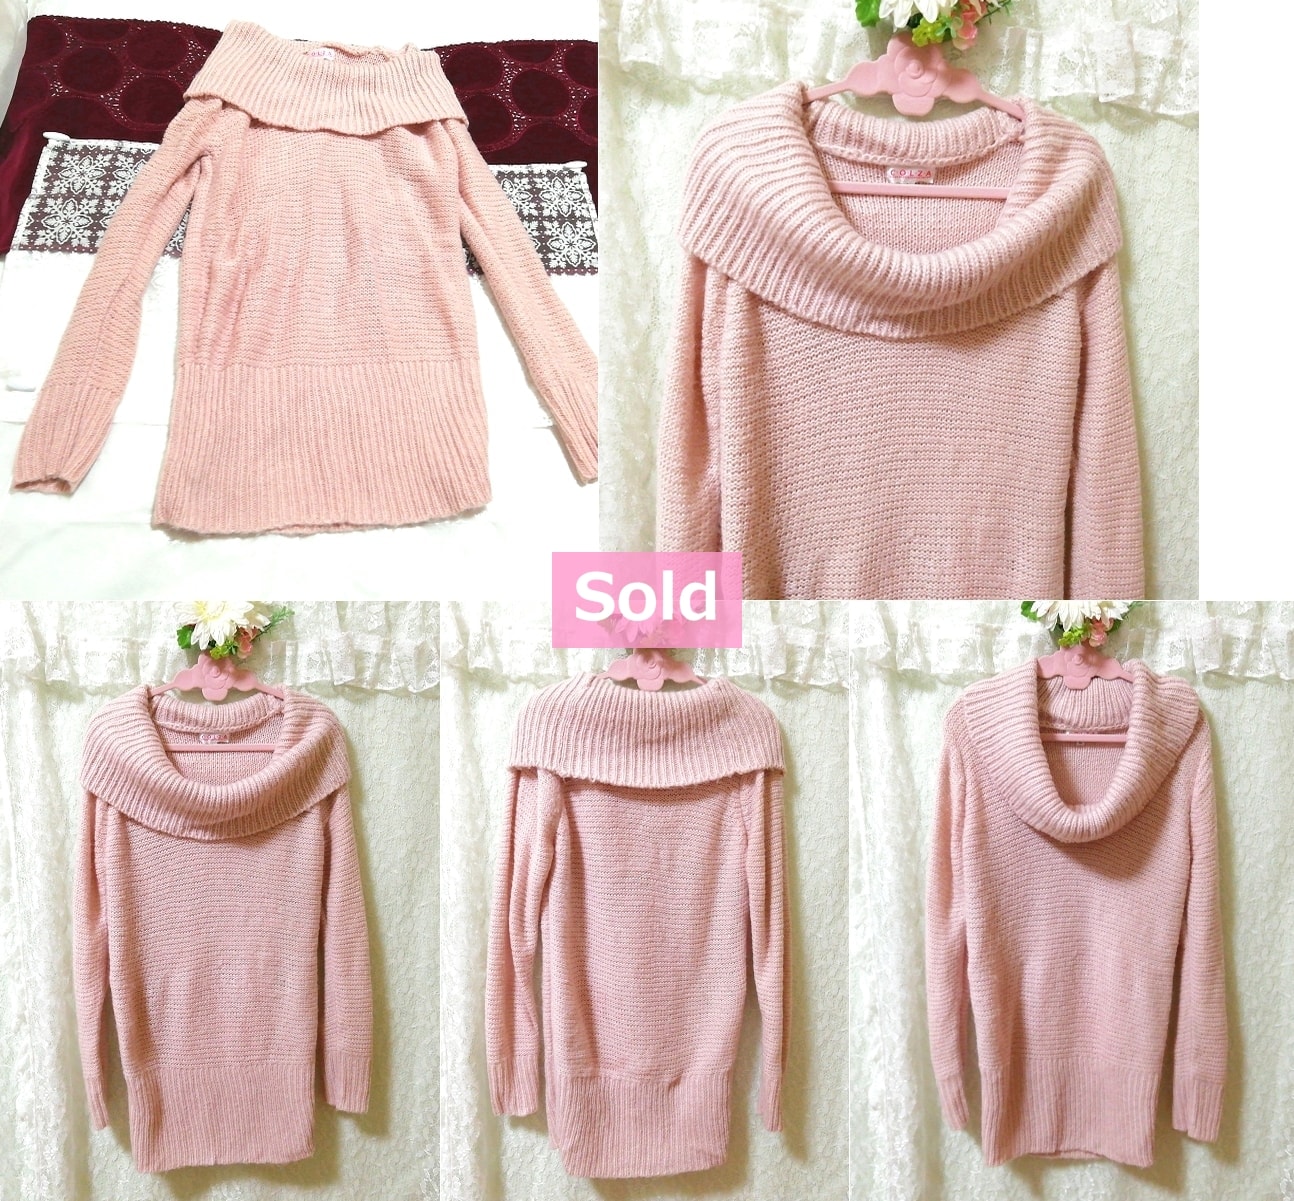 Pull en tricot rose C･o･z･a sakura, tricoter, pull-over, manche longue, taille L